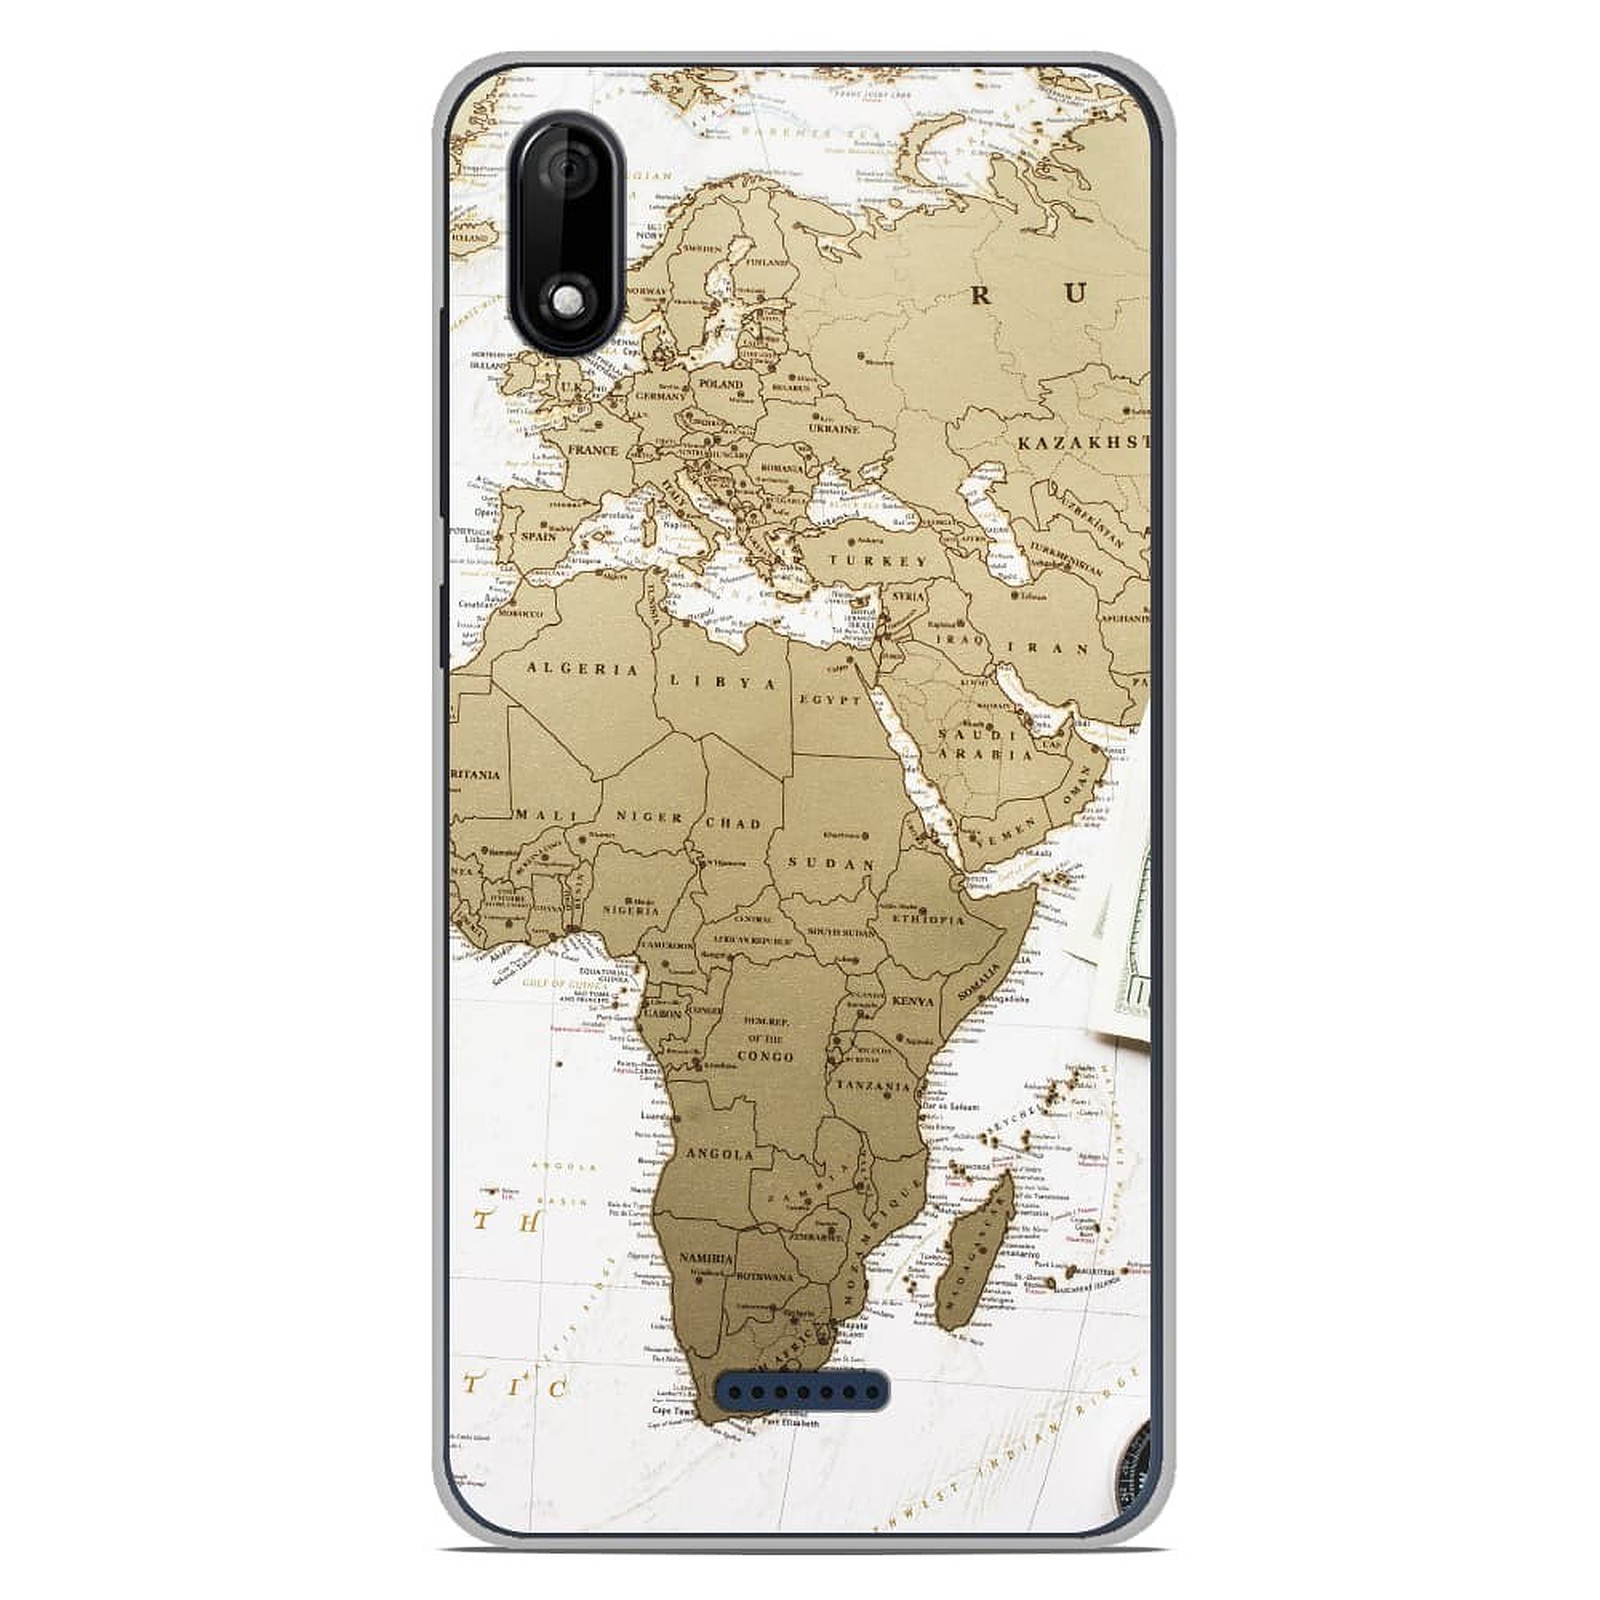 1001 Coques Coque silicone gel Wiko Y50 motif Map Europe Afrique - Coque telephone 1001Coques